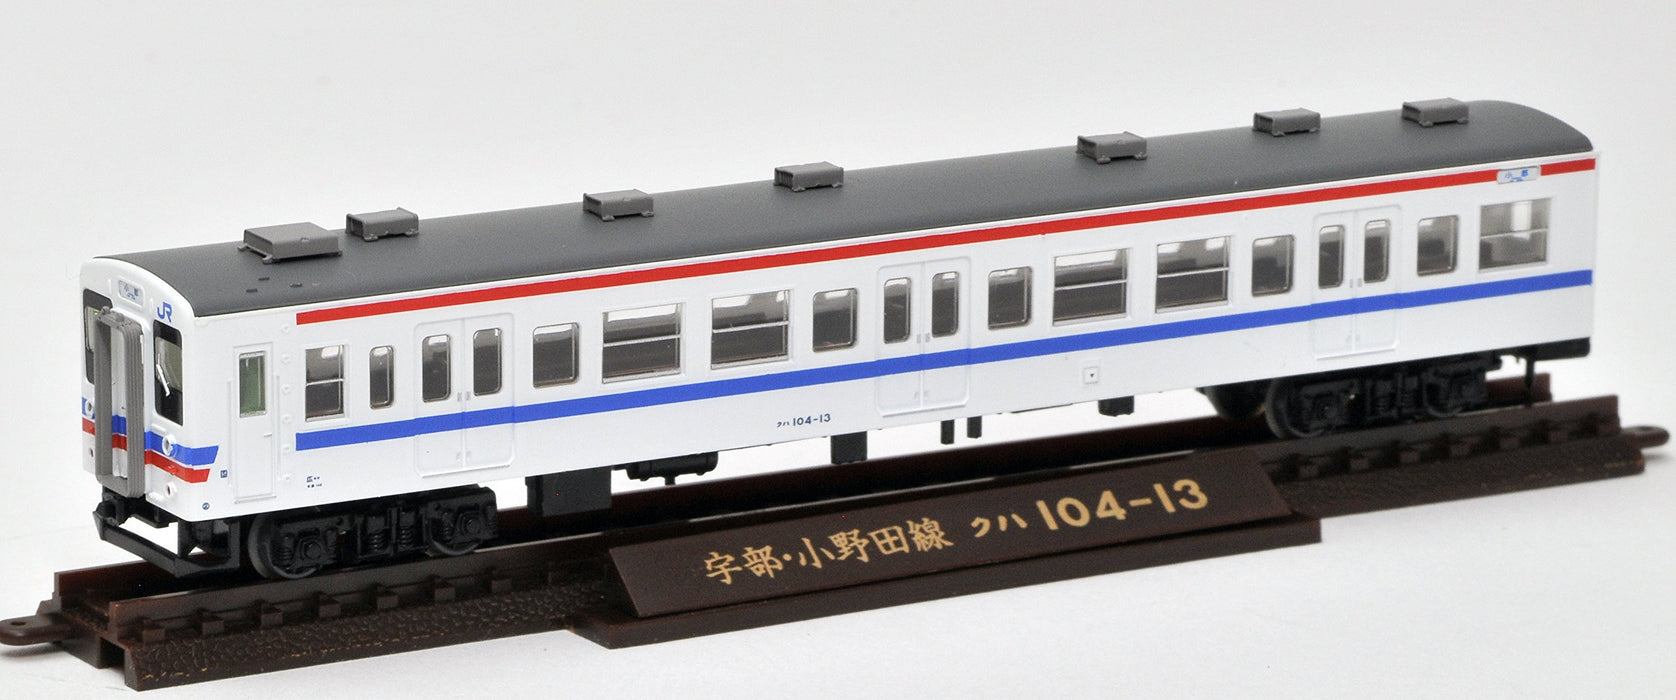 TOMYTEC Jr Series 105 New Car Ube/Onoda Line U04 Configuration/Air Conditioning Modified 2 Cars Set N Scale